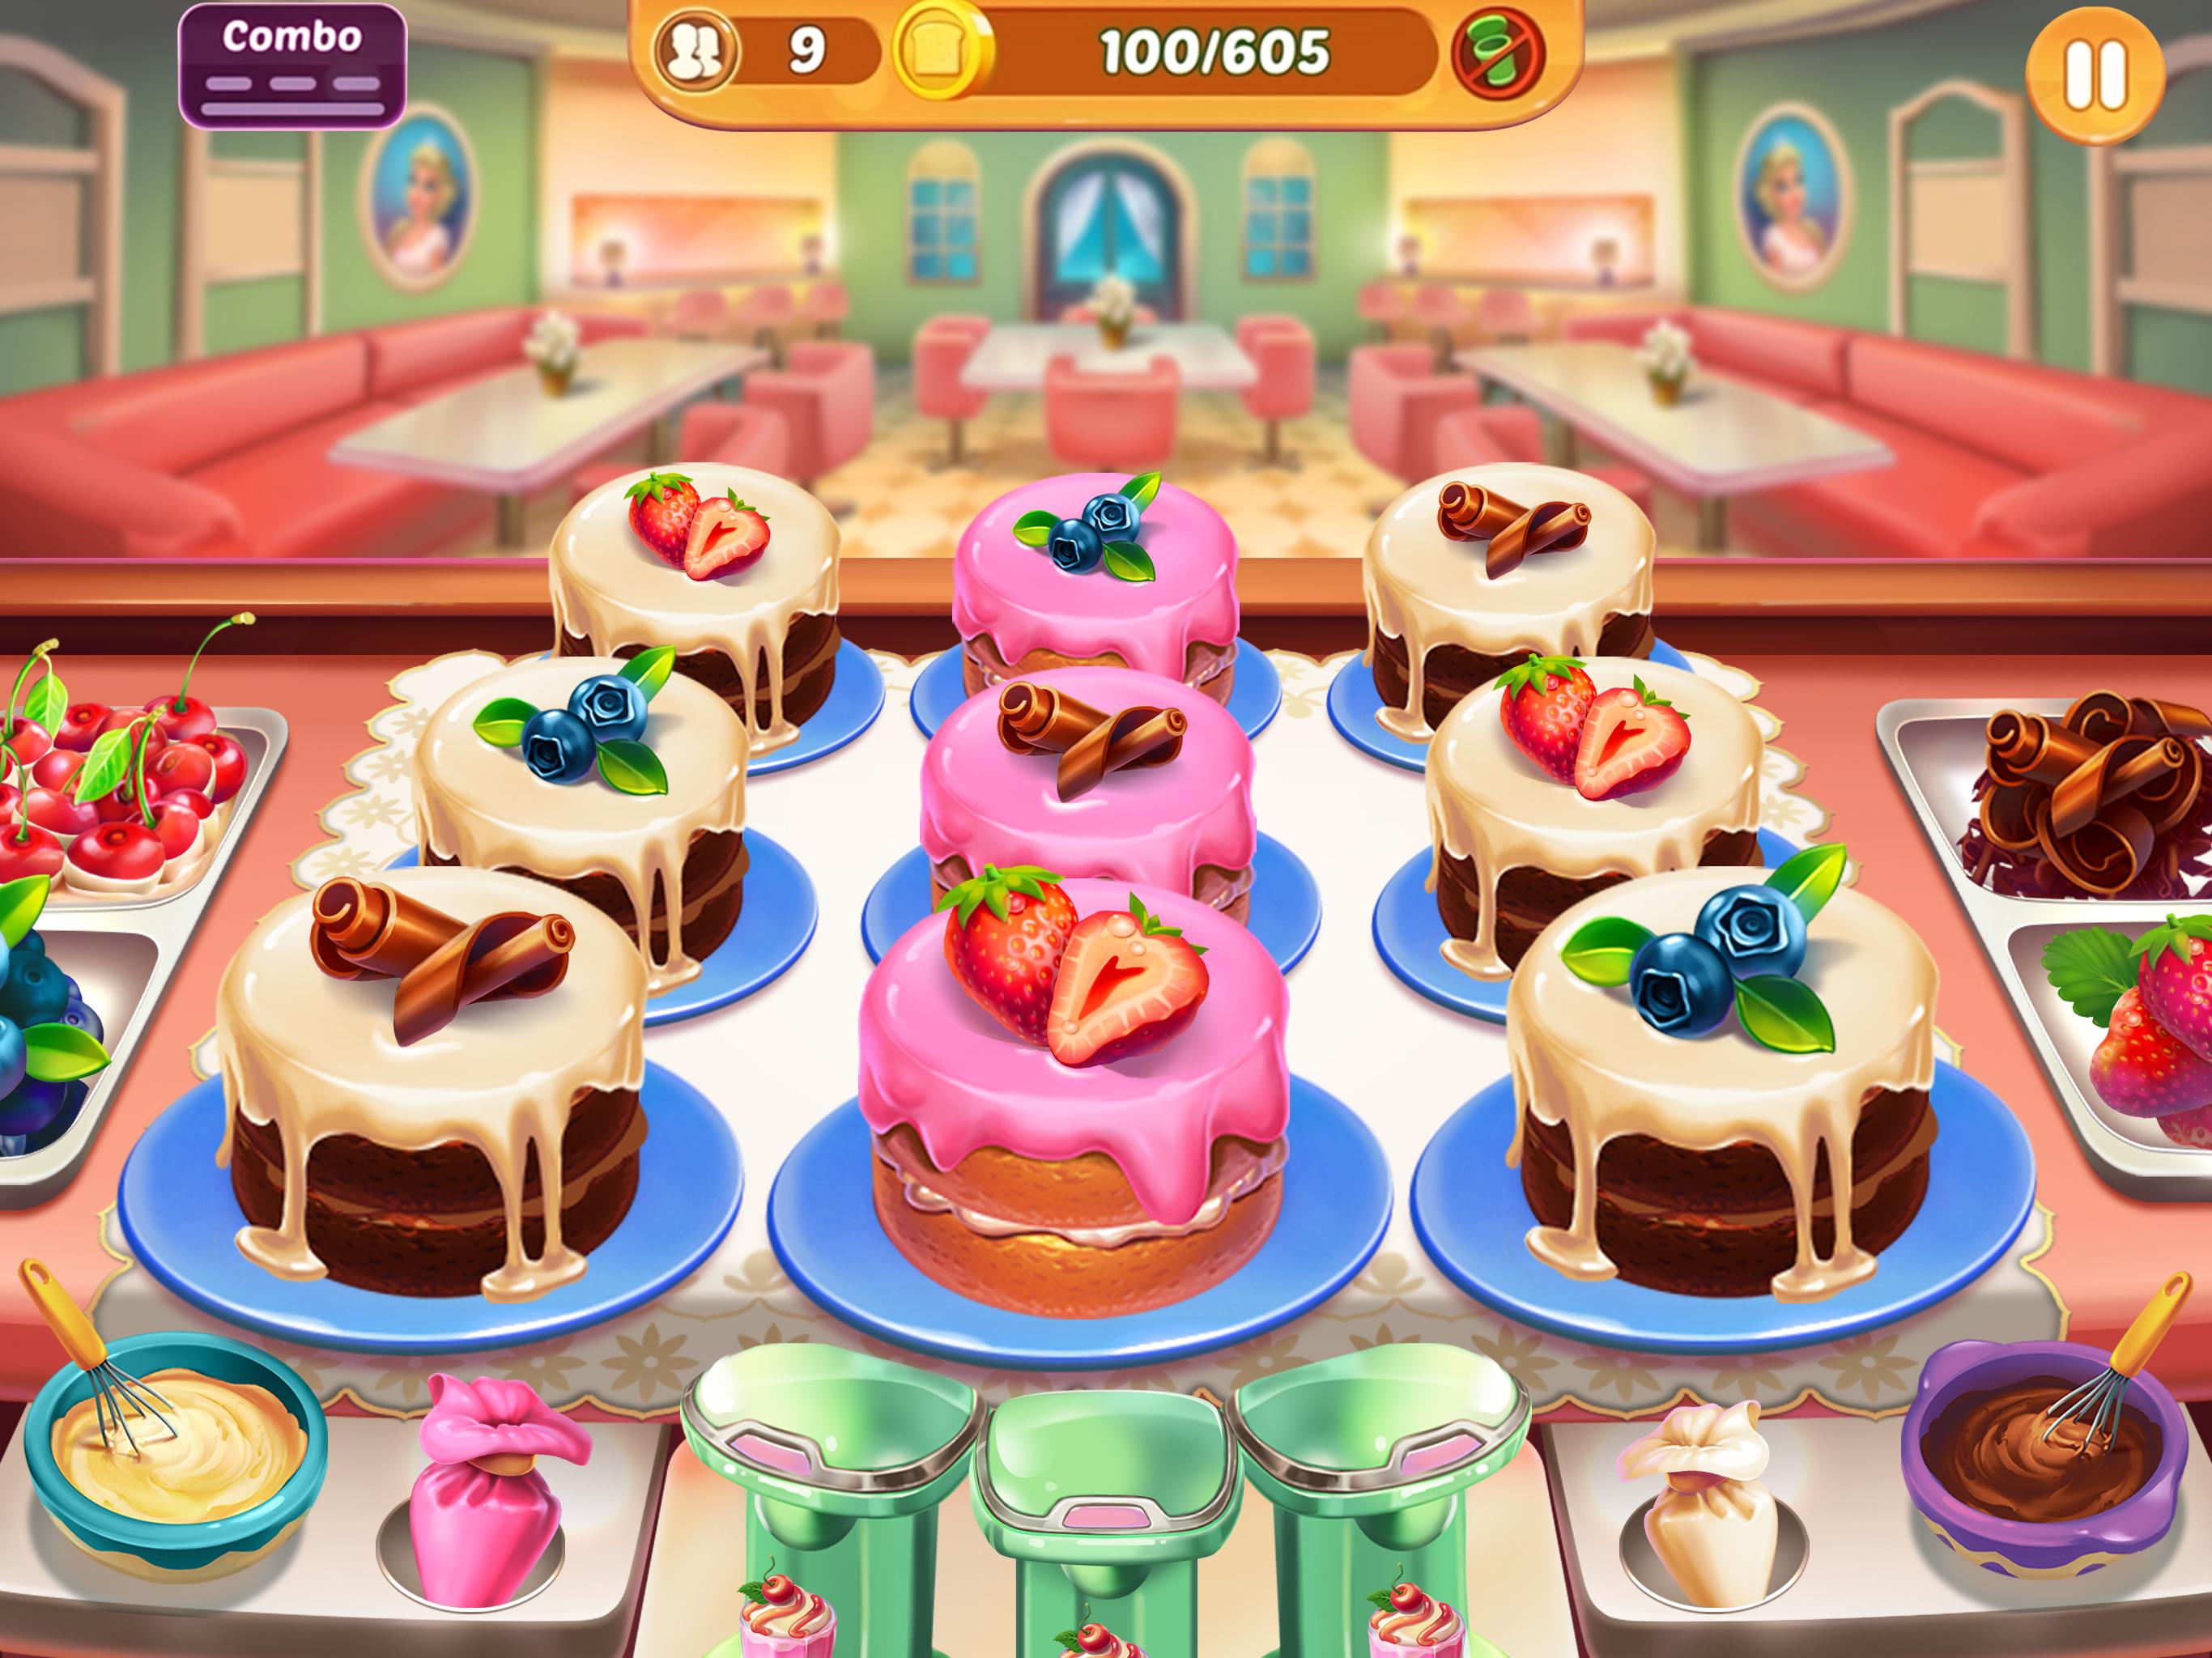 Cooking Crush Cooking Games Madness - Frenzy City 1.2.4 Screenshot 21